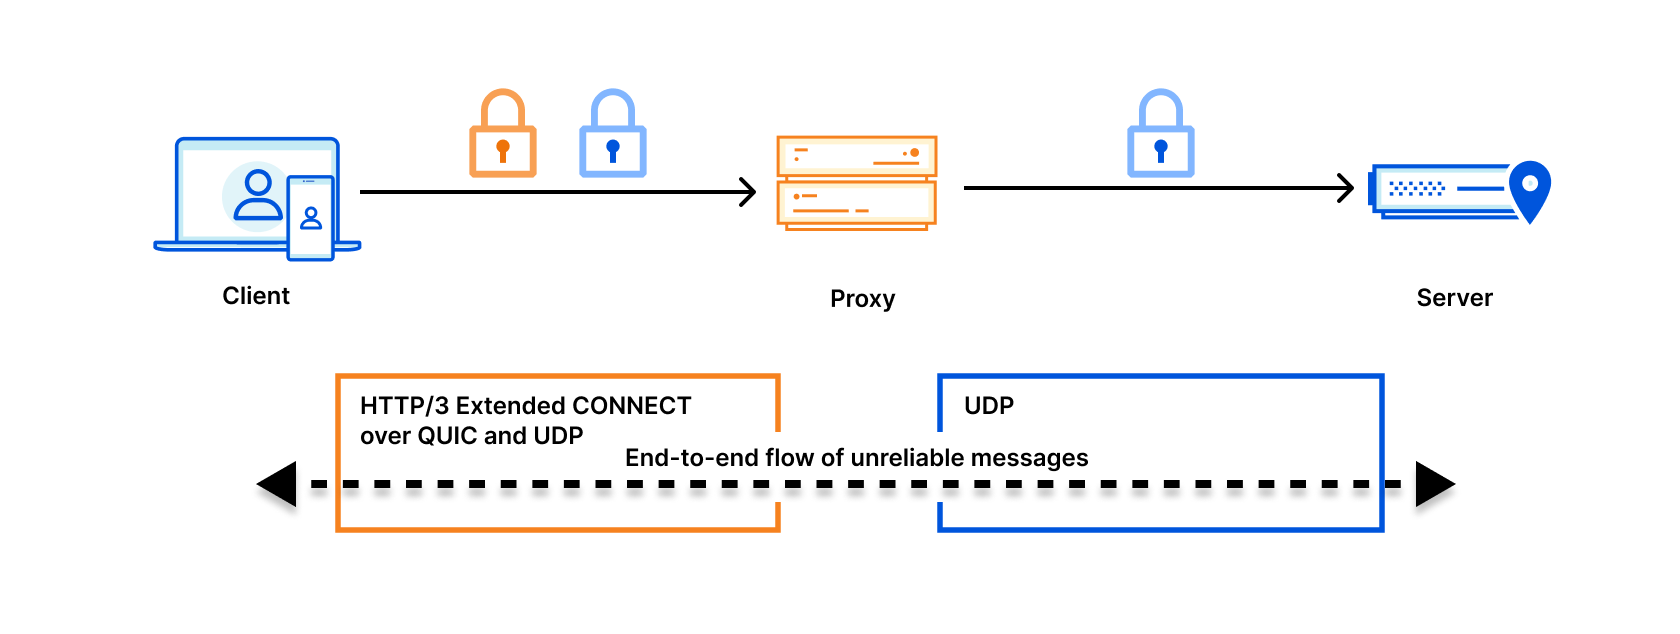 Components involved in UDP tunneling. From left-to-right: Client, Proxy, Server.